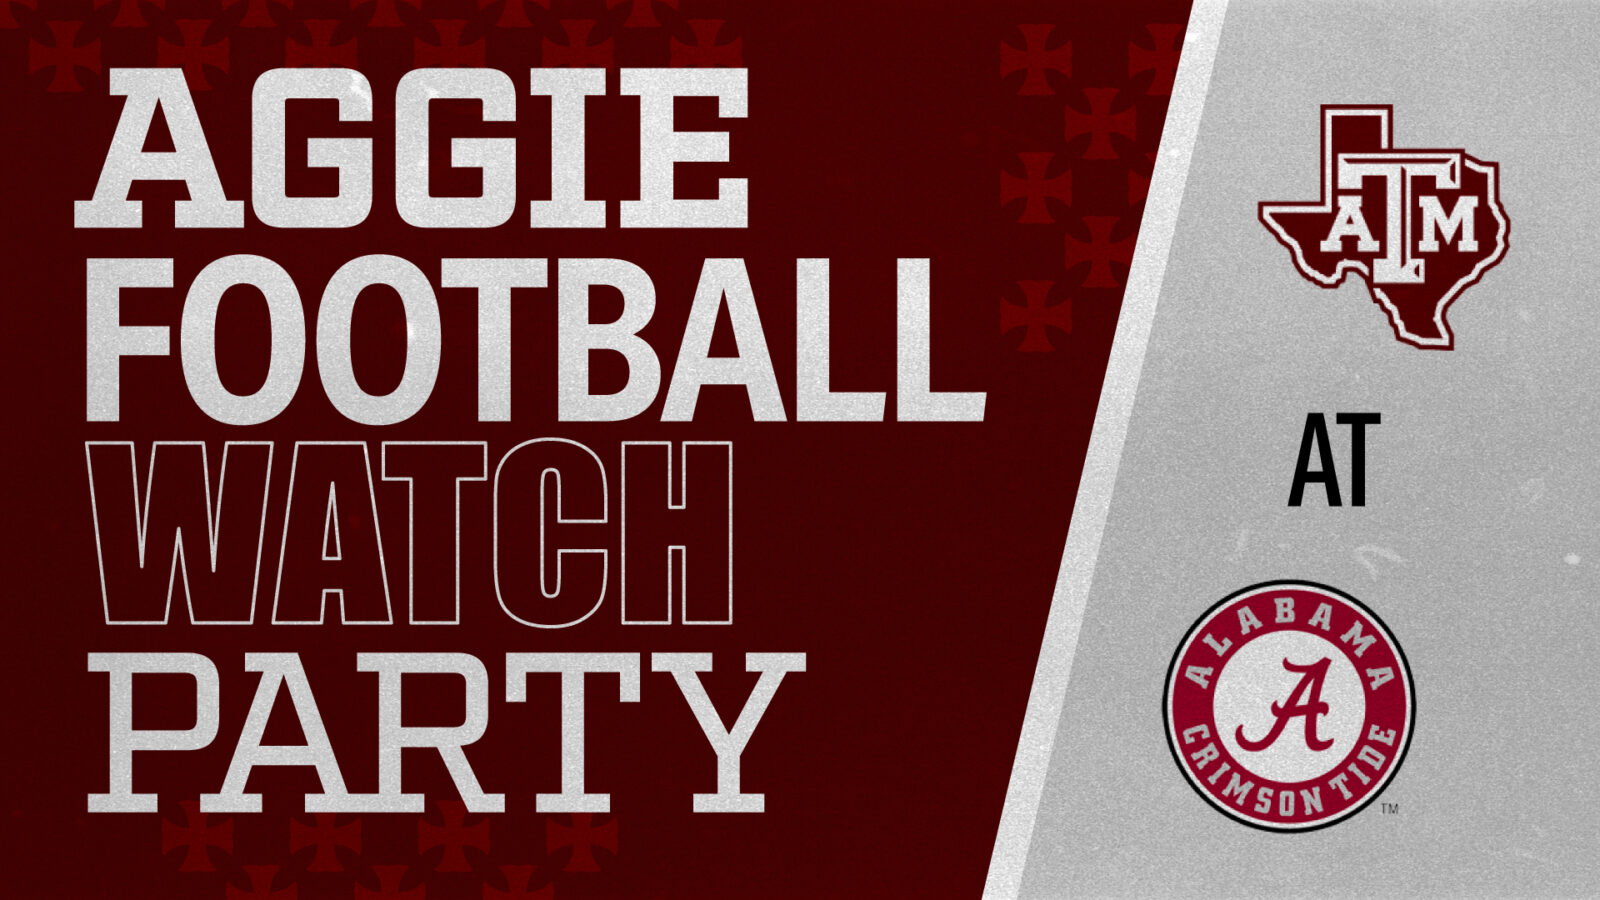 SUPPER CLUB: AGGIE FOOTBALL GAME WATCHING PARTY